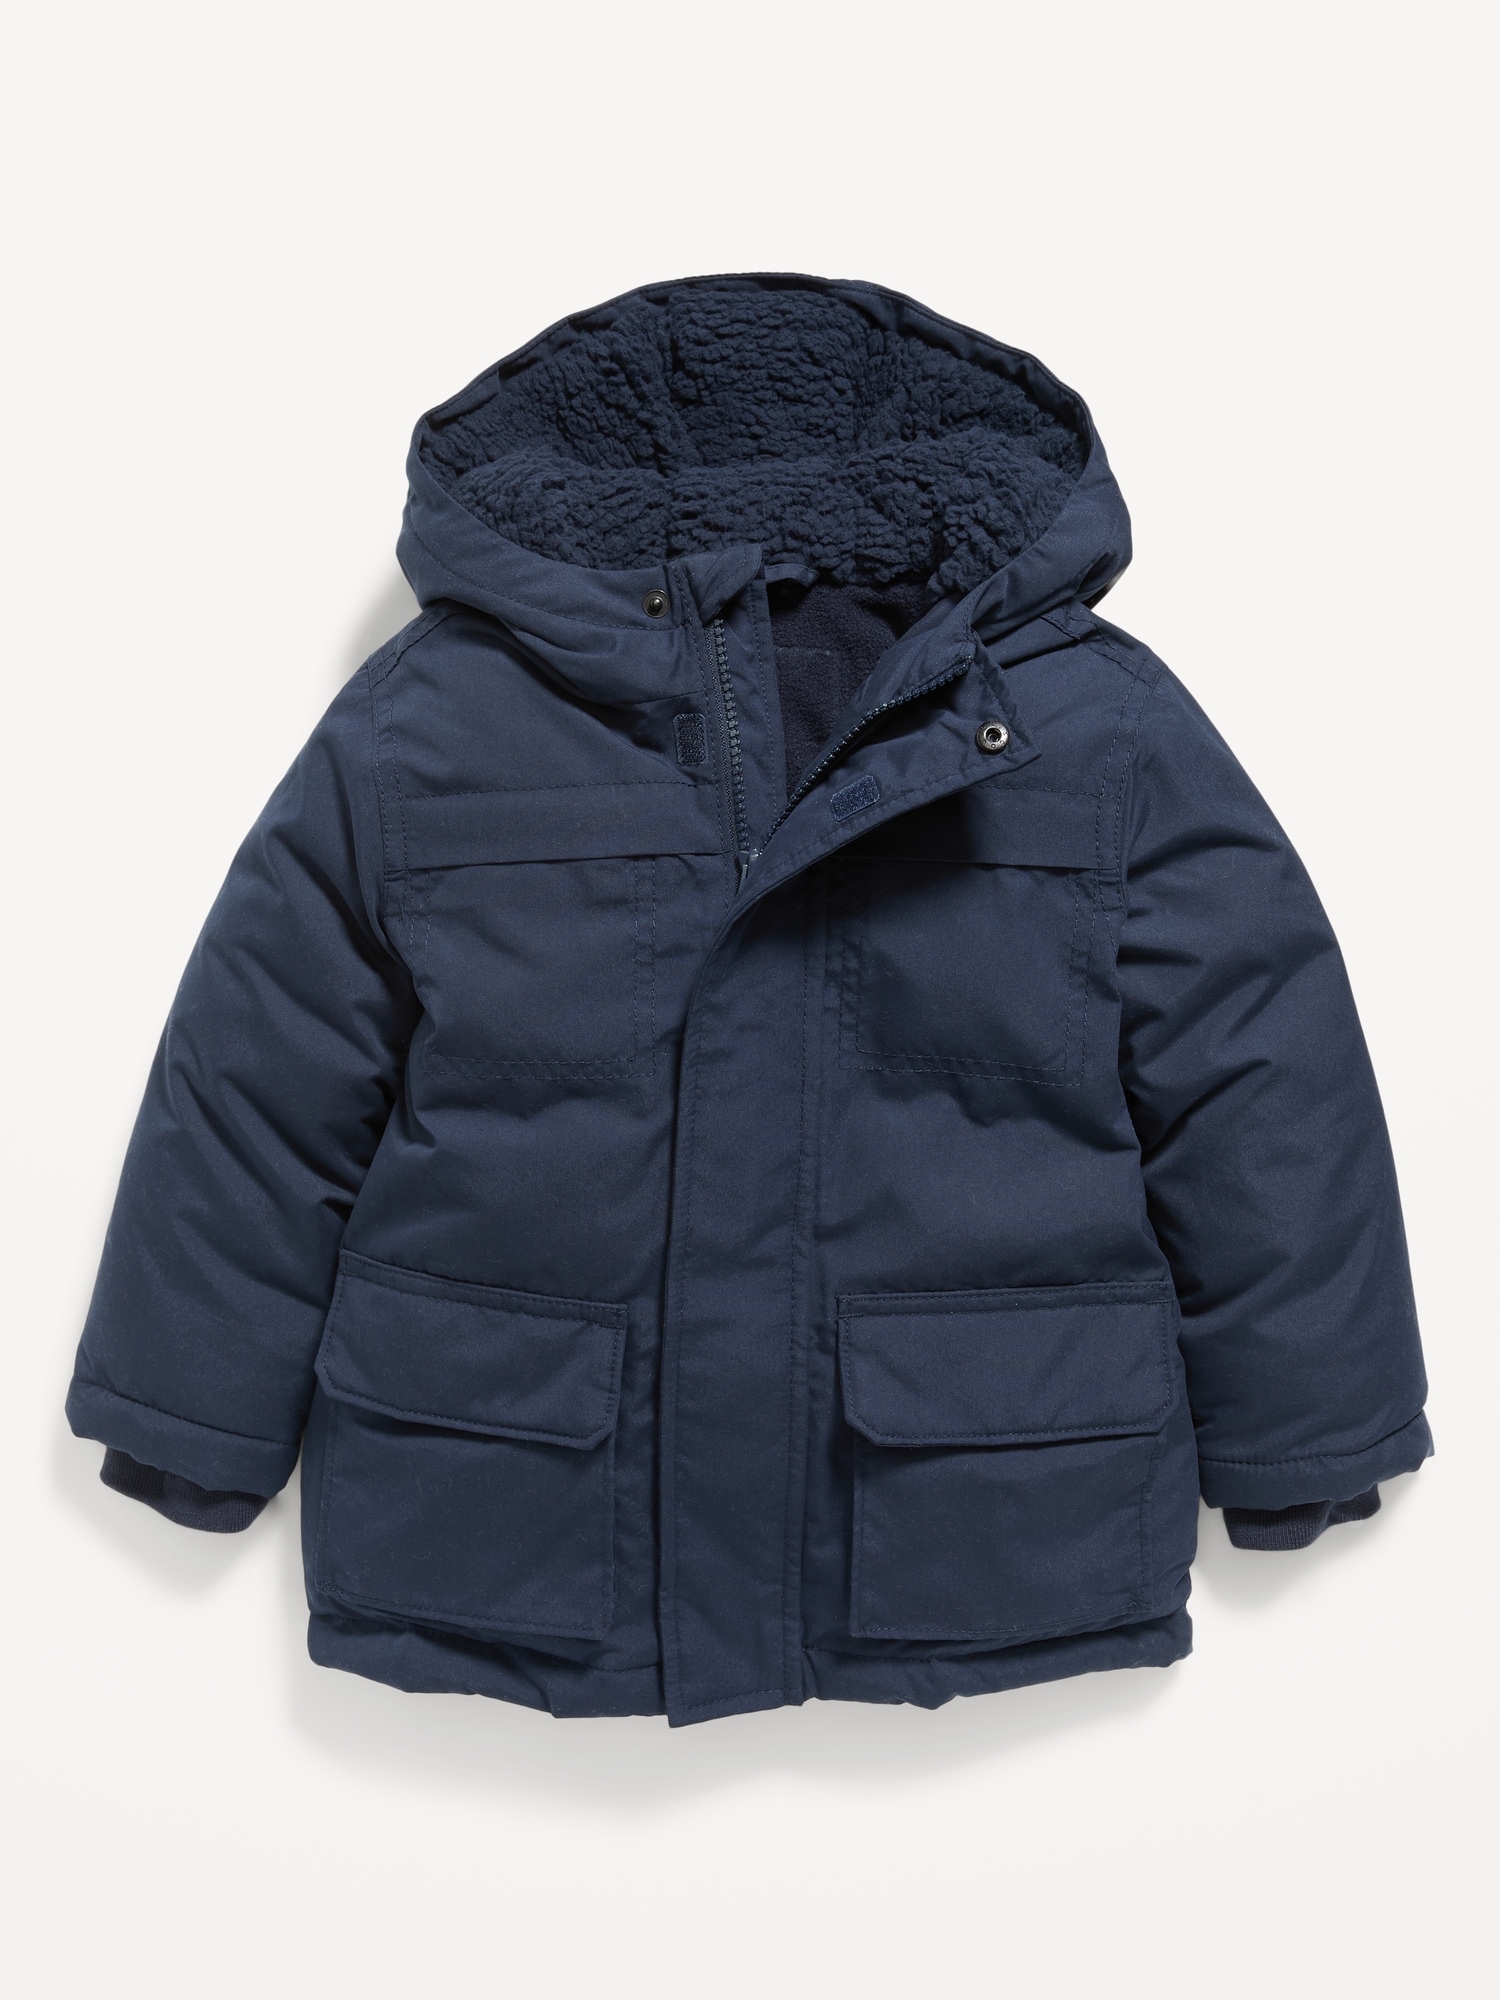 Toddler Boys' Water-Resistant Jacket (2T-4T)